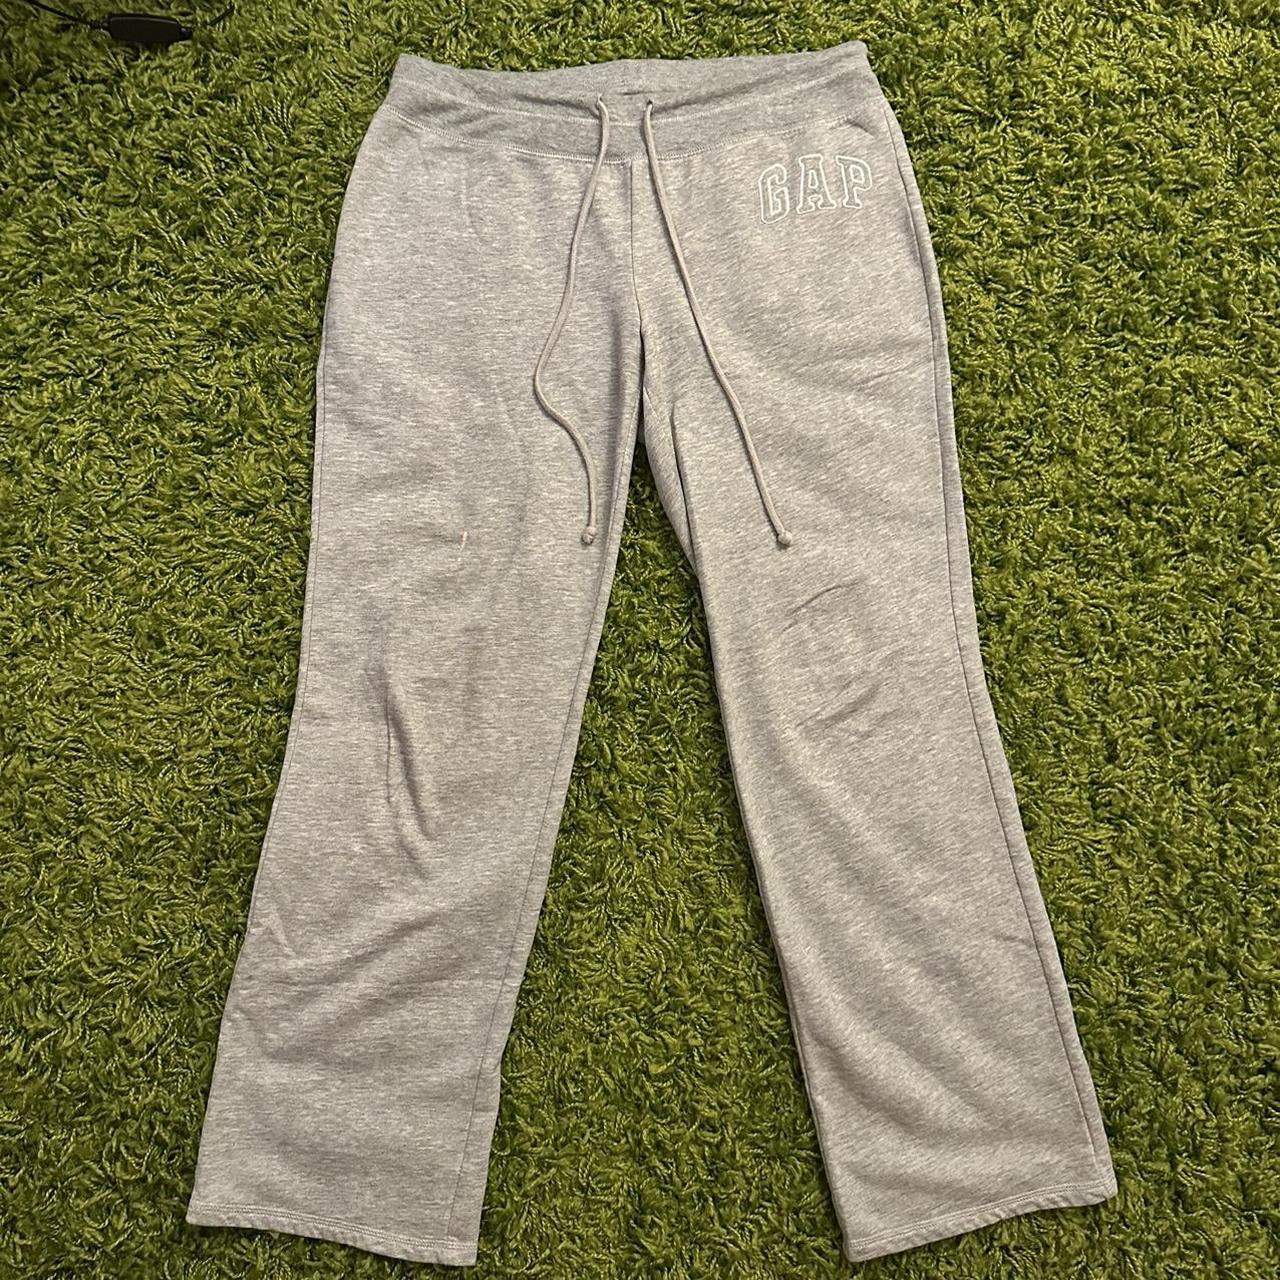 Gap Women's Grey and White Joggers-tracksuits | Depop